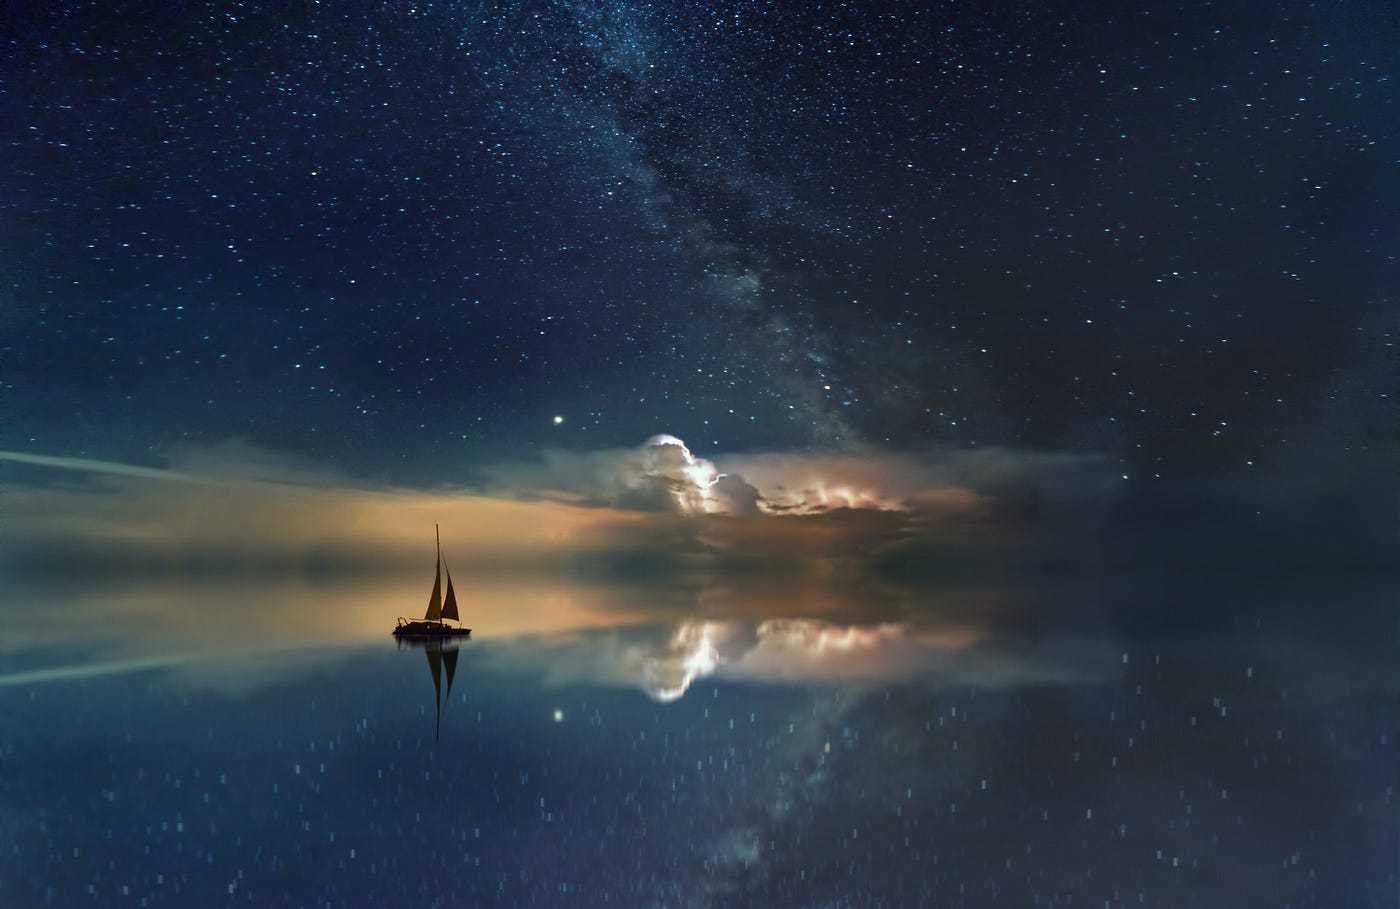 HALLUCINATIONS: boat drifting through clouds and stars.